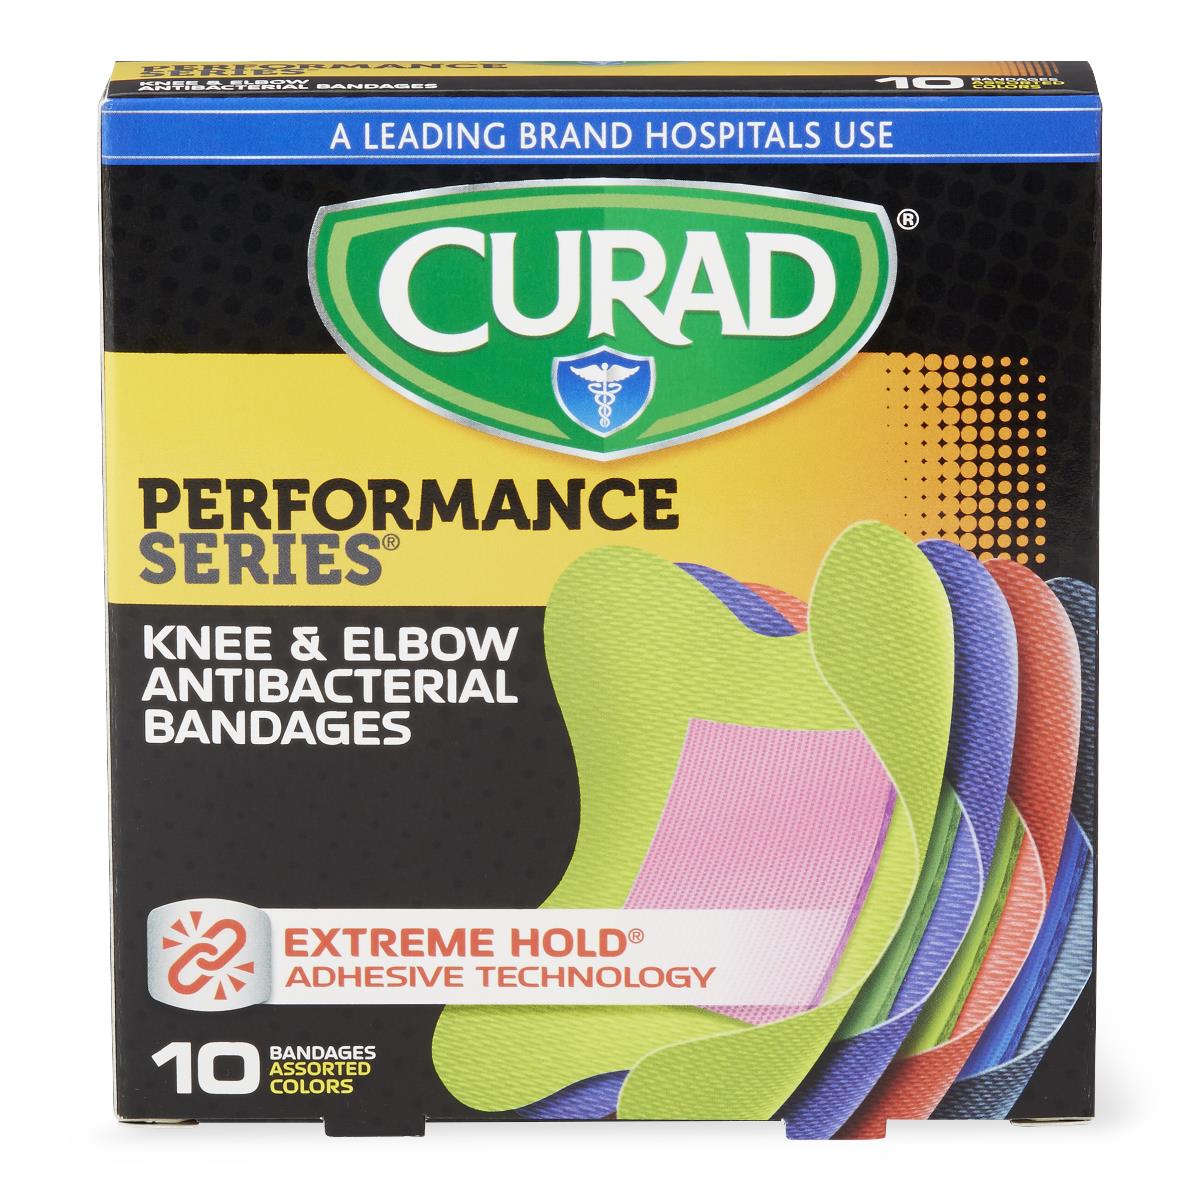 CURAD Performance Series Foam Tape, 24 Box-Case, Pink – Wasatch